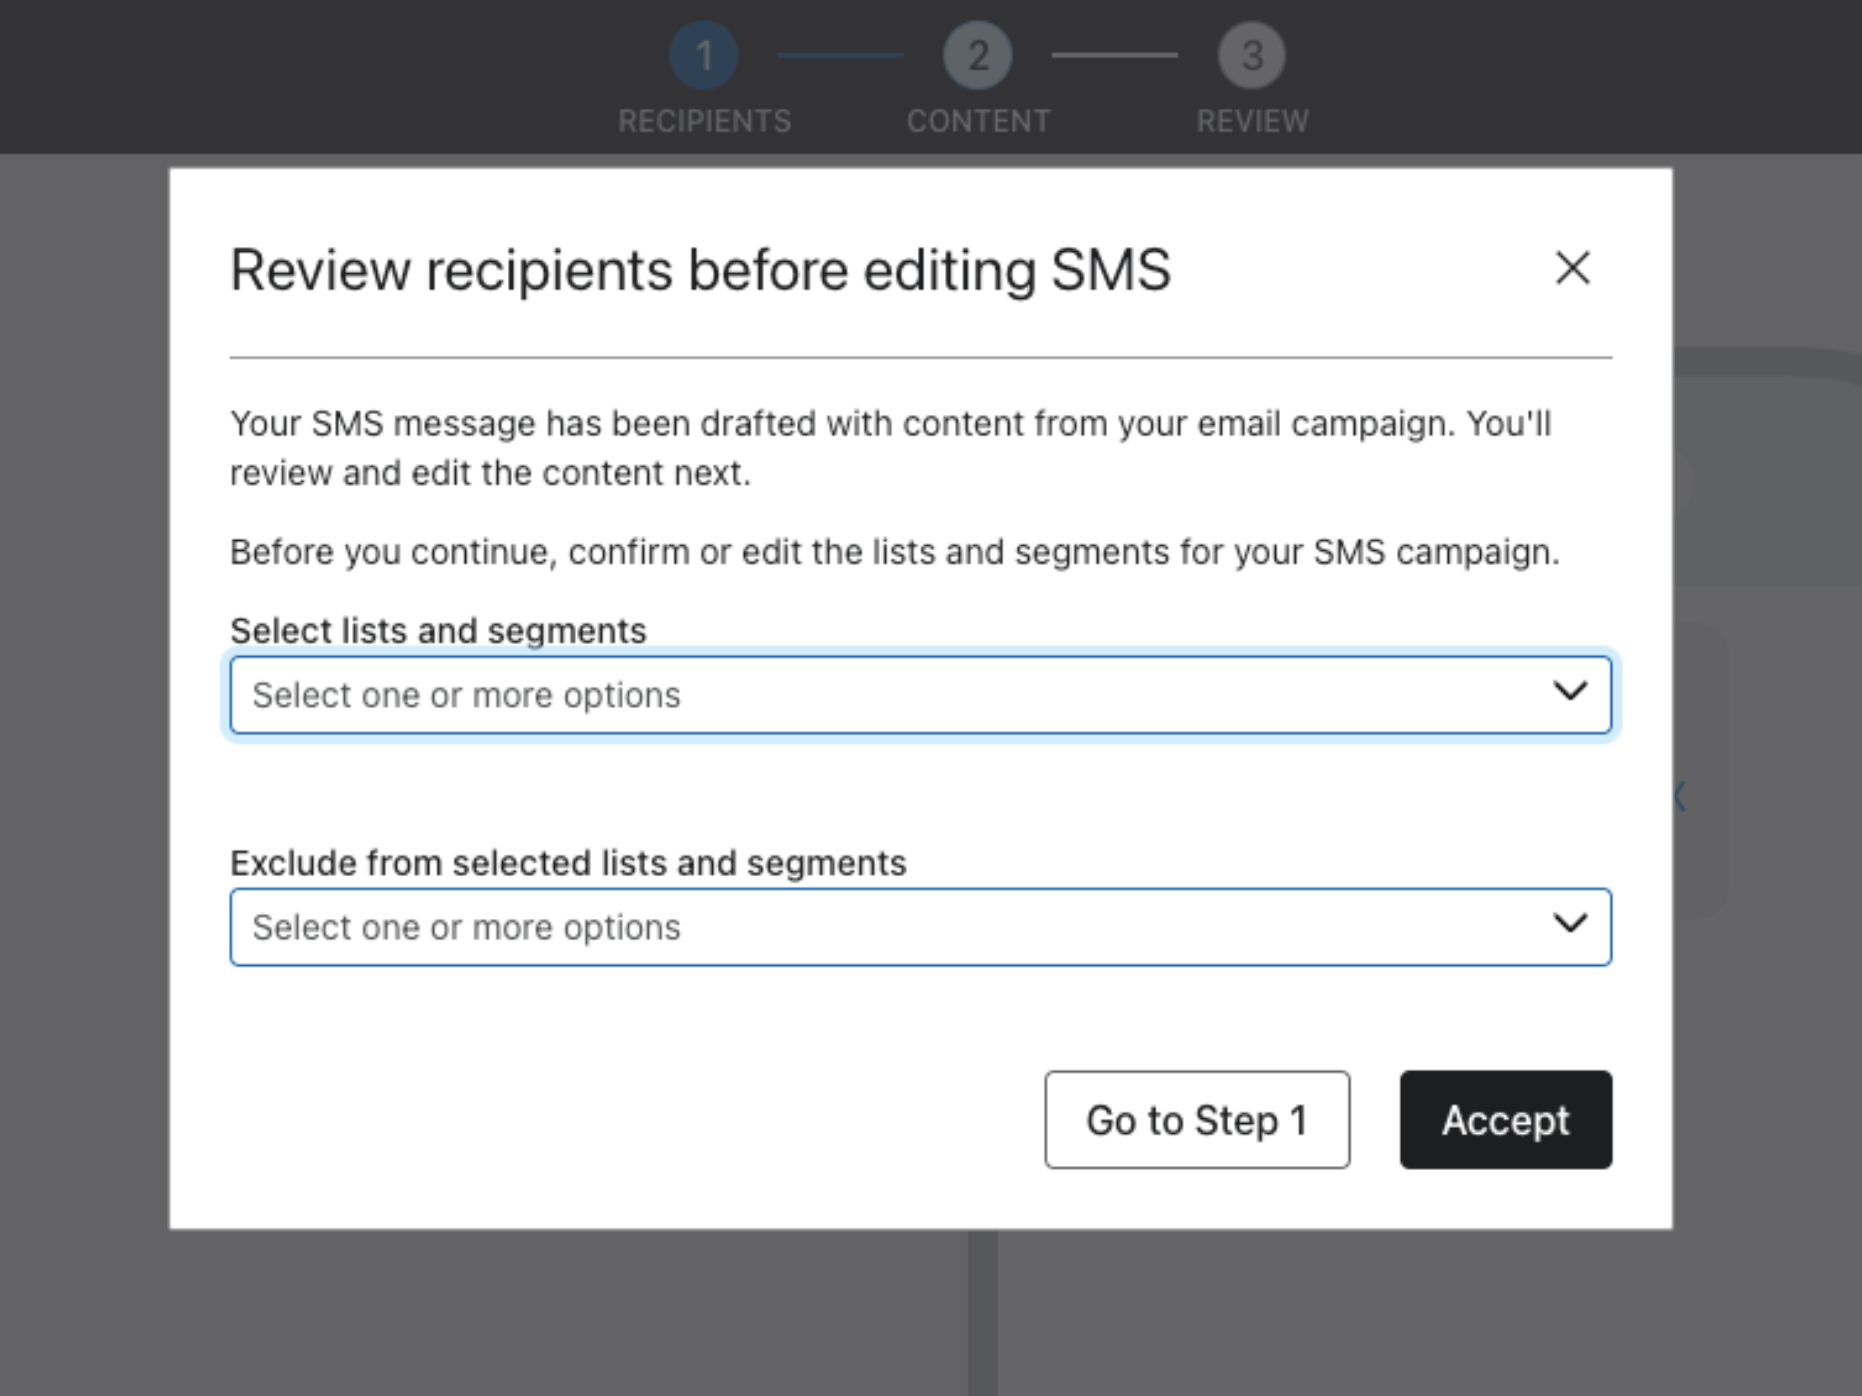 Reviewing SMS recipients